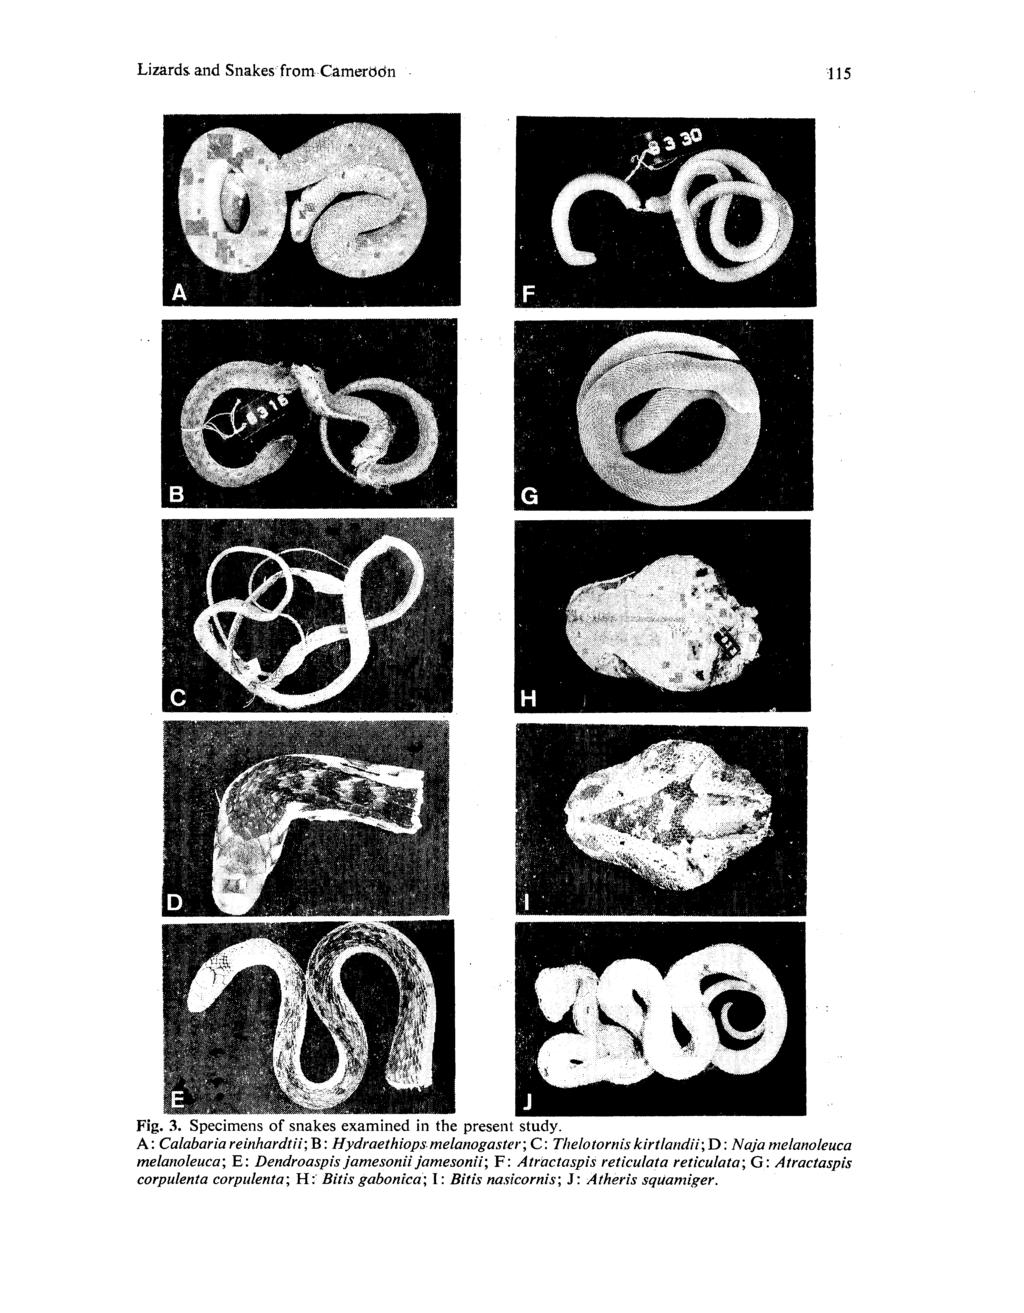 Lizards. and Snakes from Camerdon - 115 Fig. 3. Specimens of snakes examined in the present study.